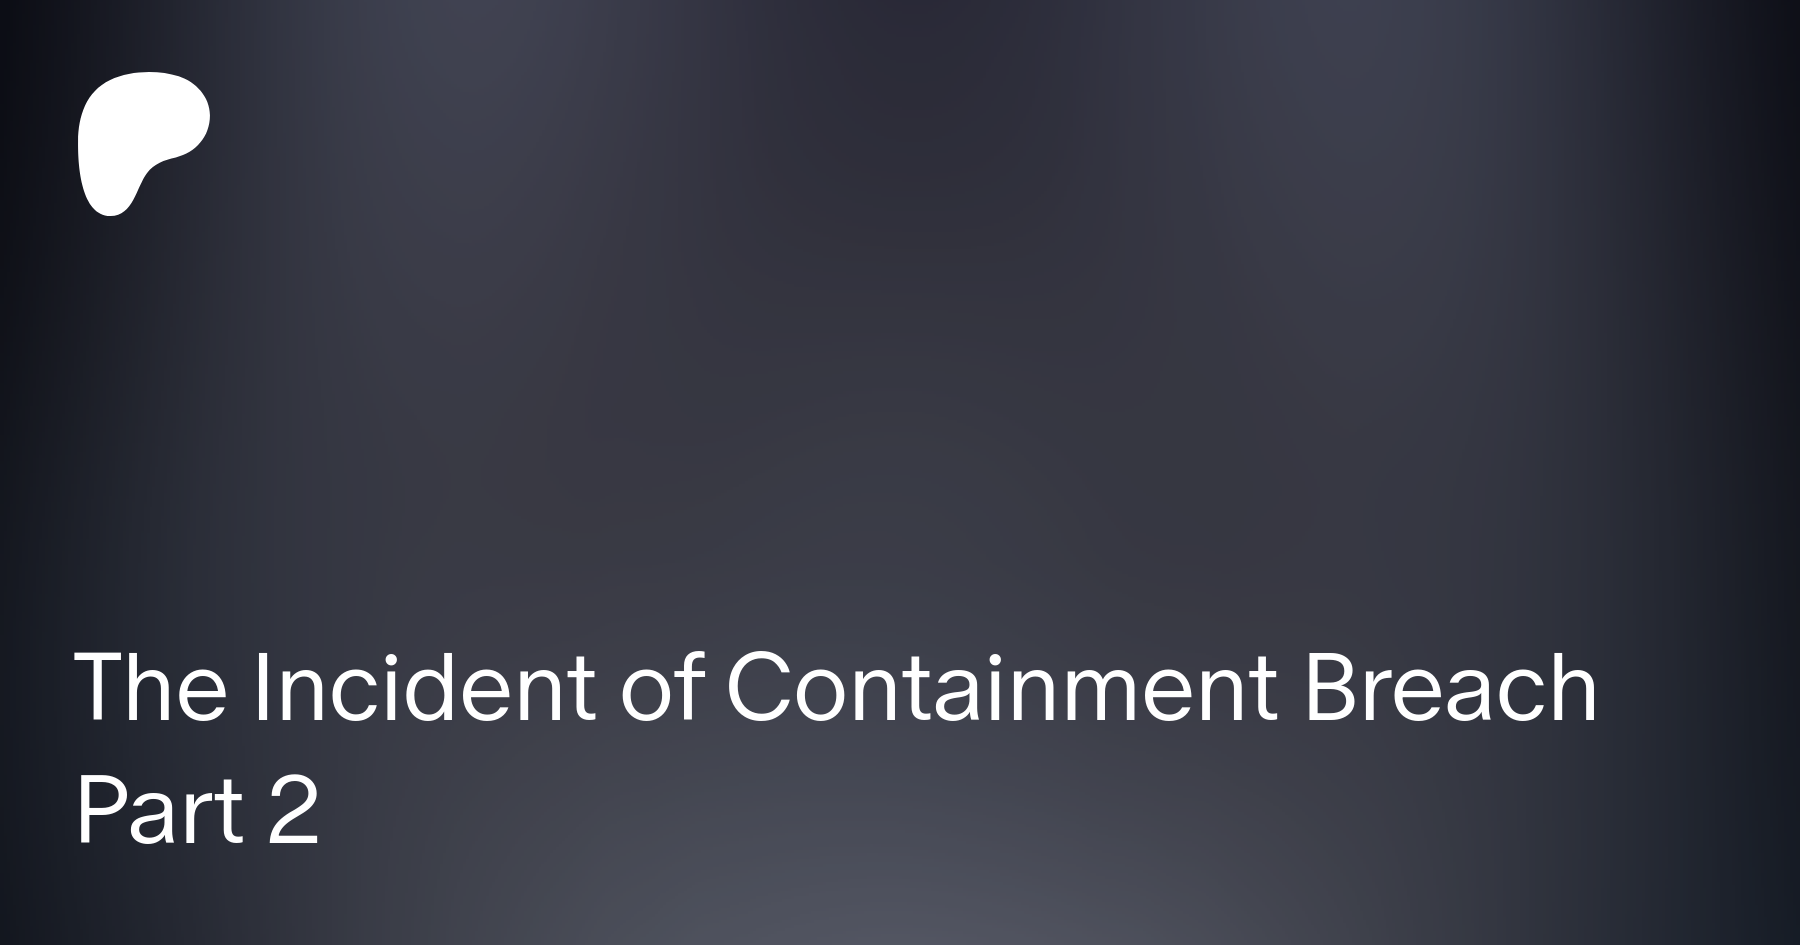 The incident of containment breach part 2